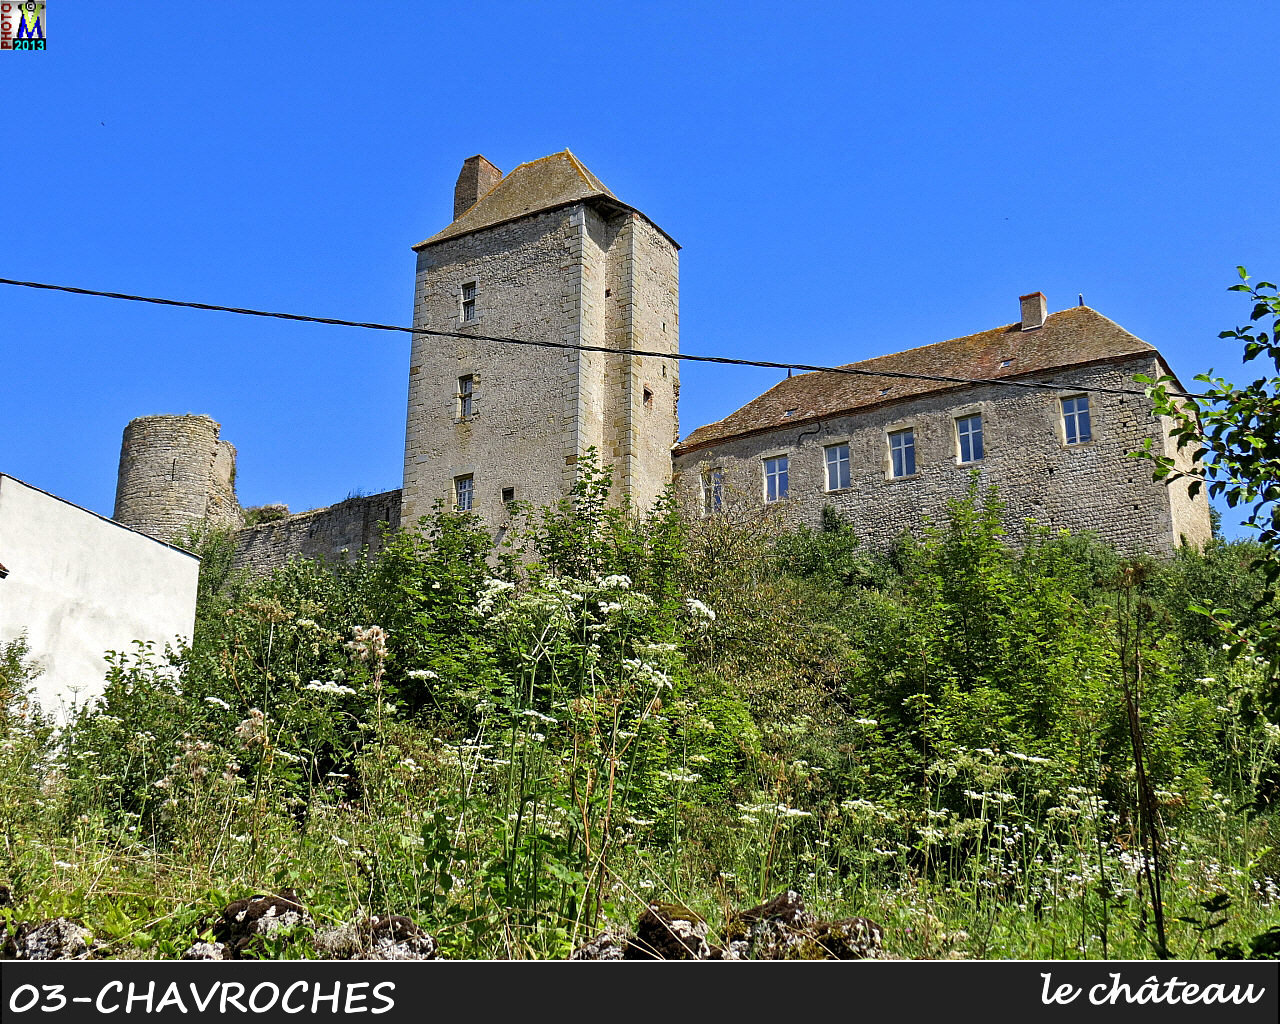 03CHAVROCHES_chateau_100.jpg